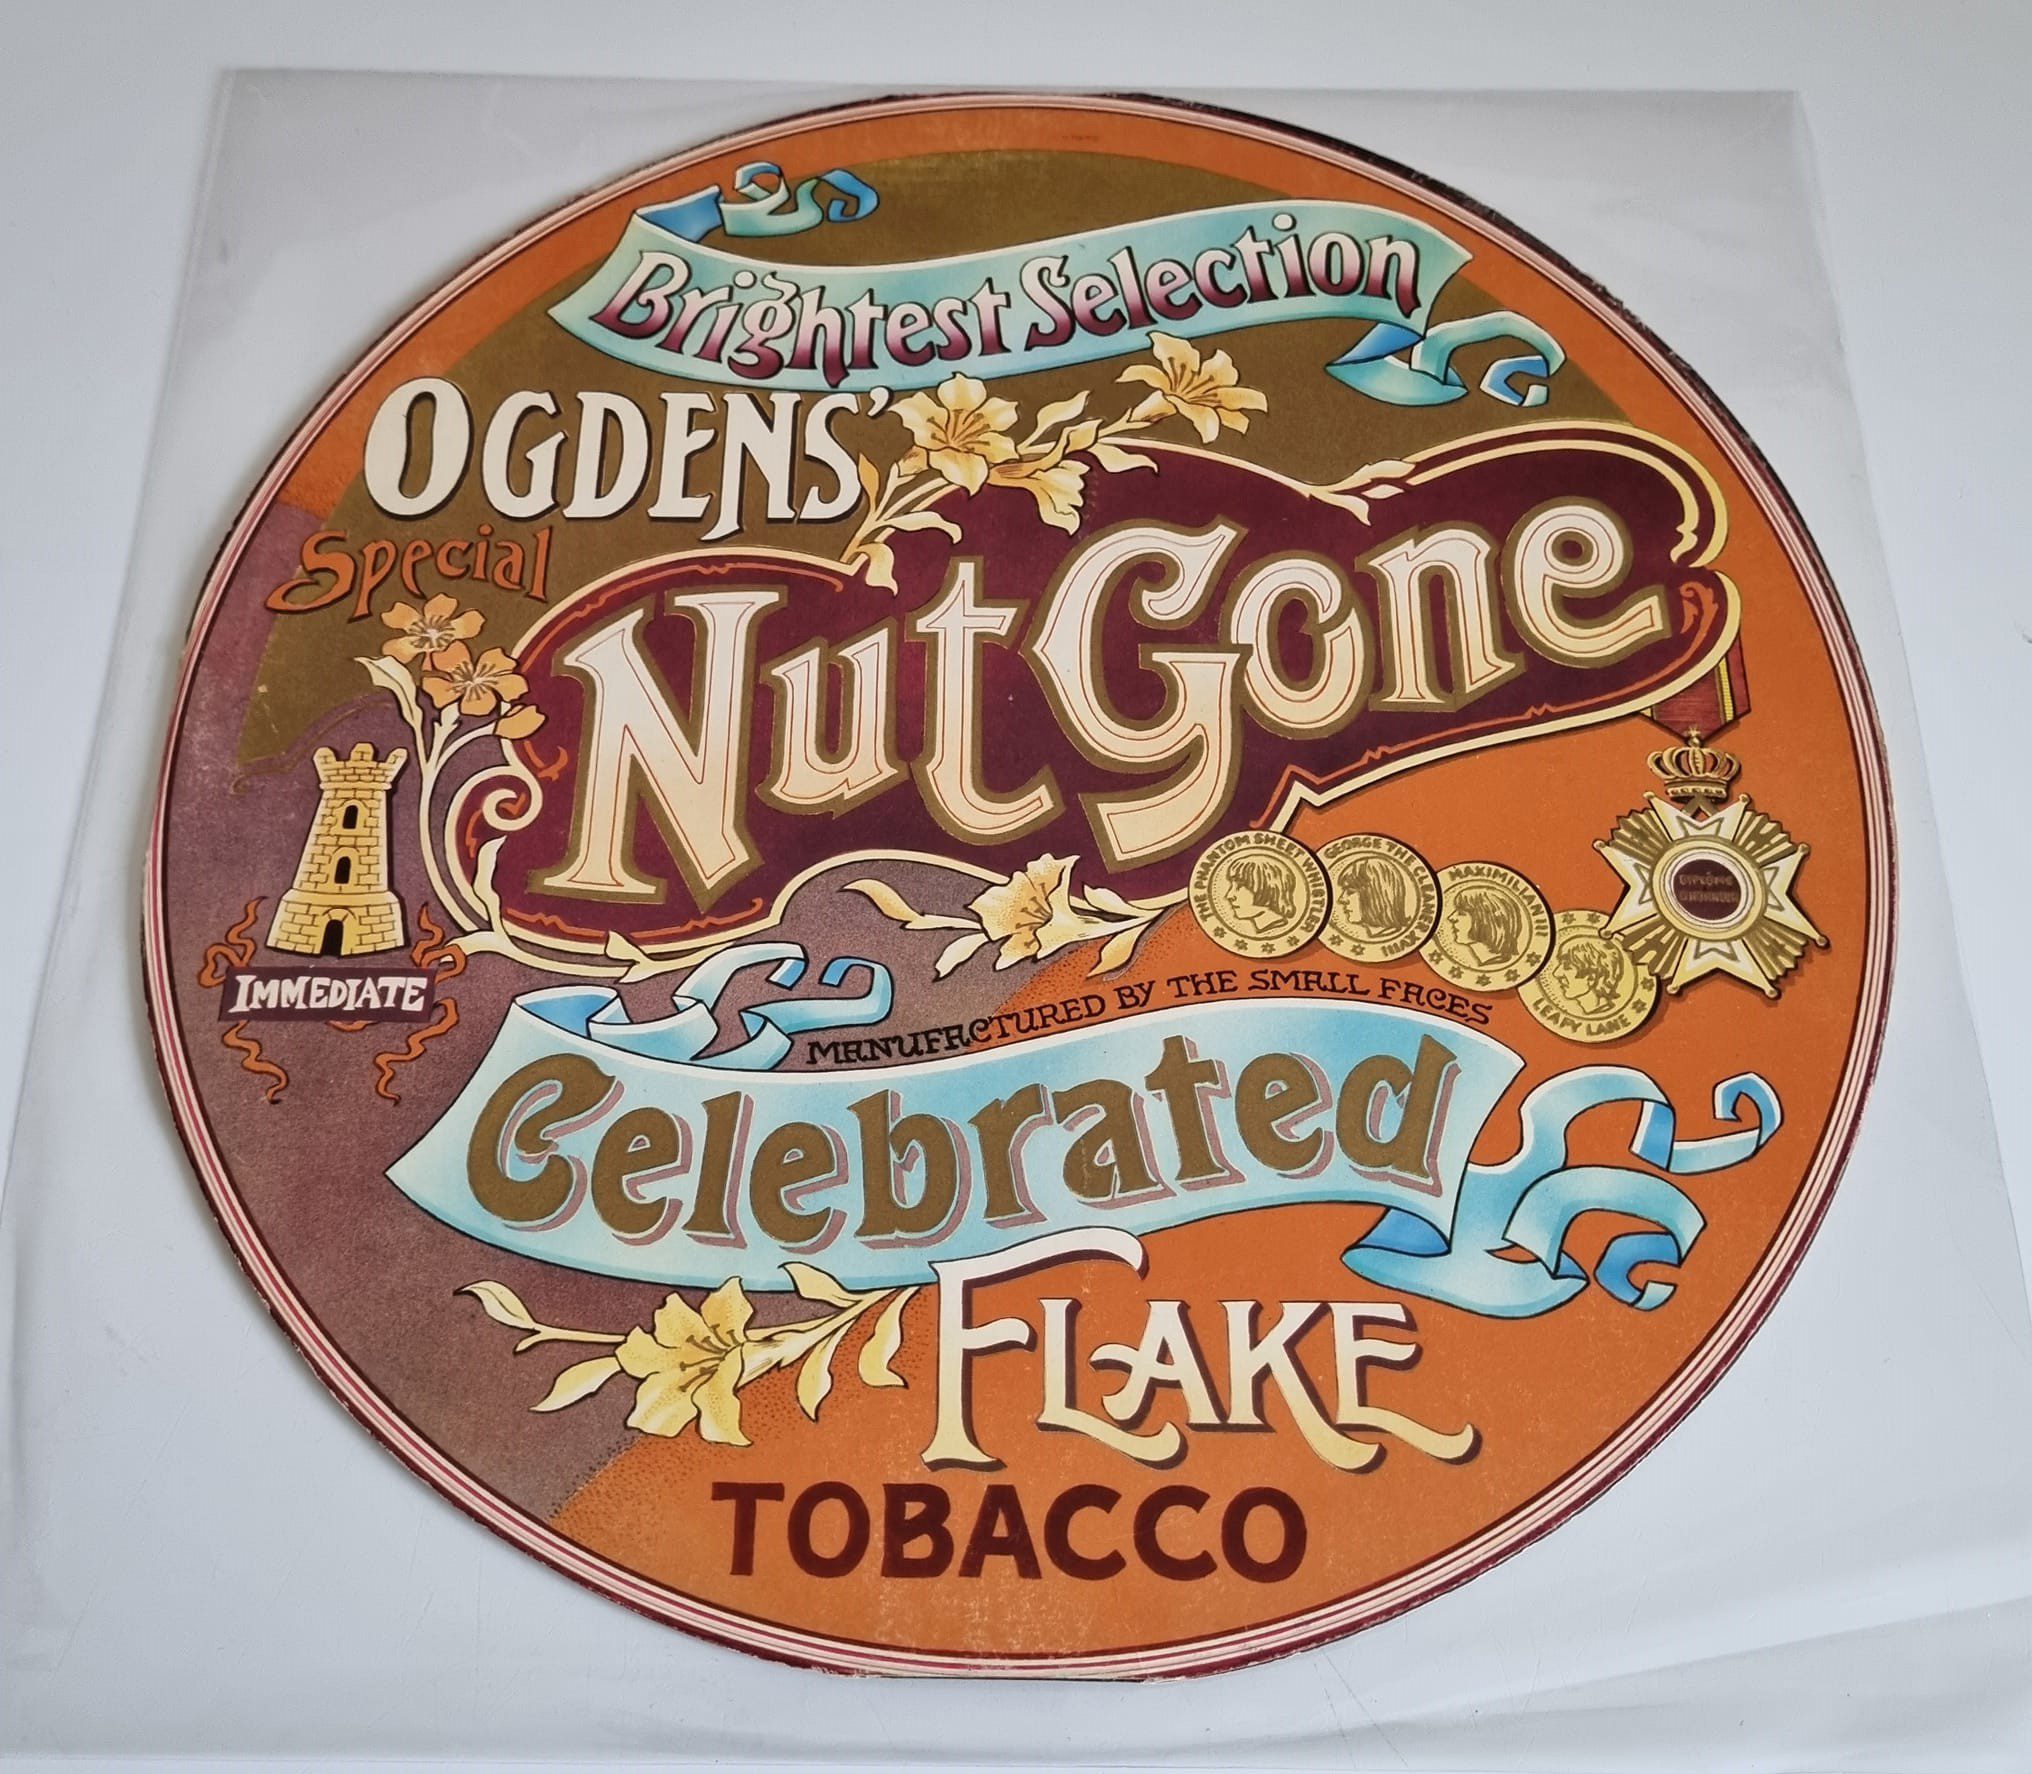 Buy this rare Small Faces record by clicking here